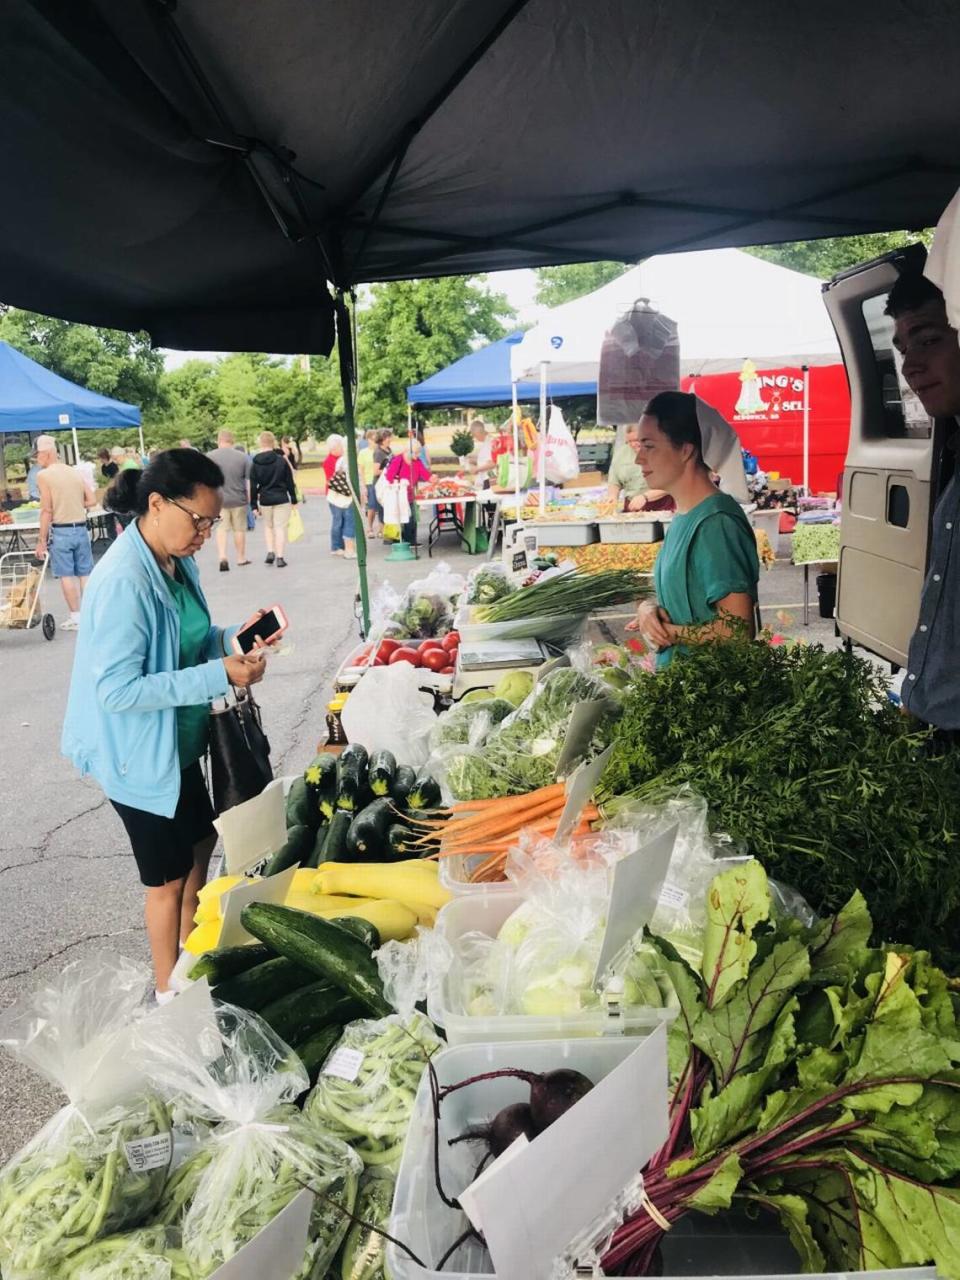 The Kansas Grown Farmers Market at the Sedgwick County Extension Center, 21st and Ridge, also opens for the season on Saturday.